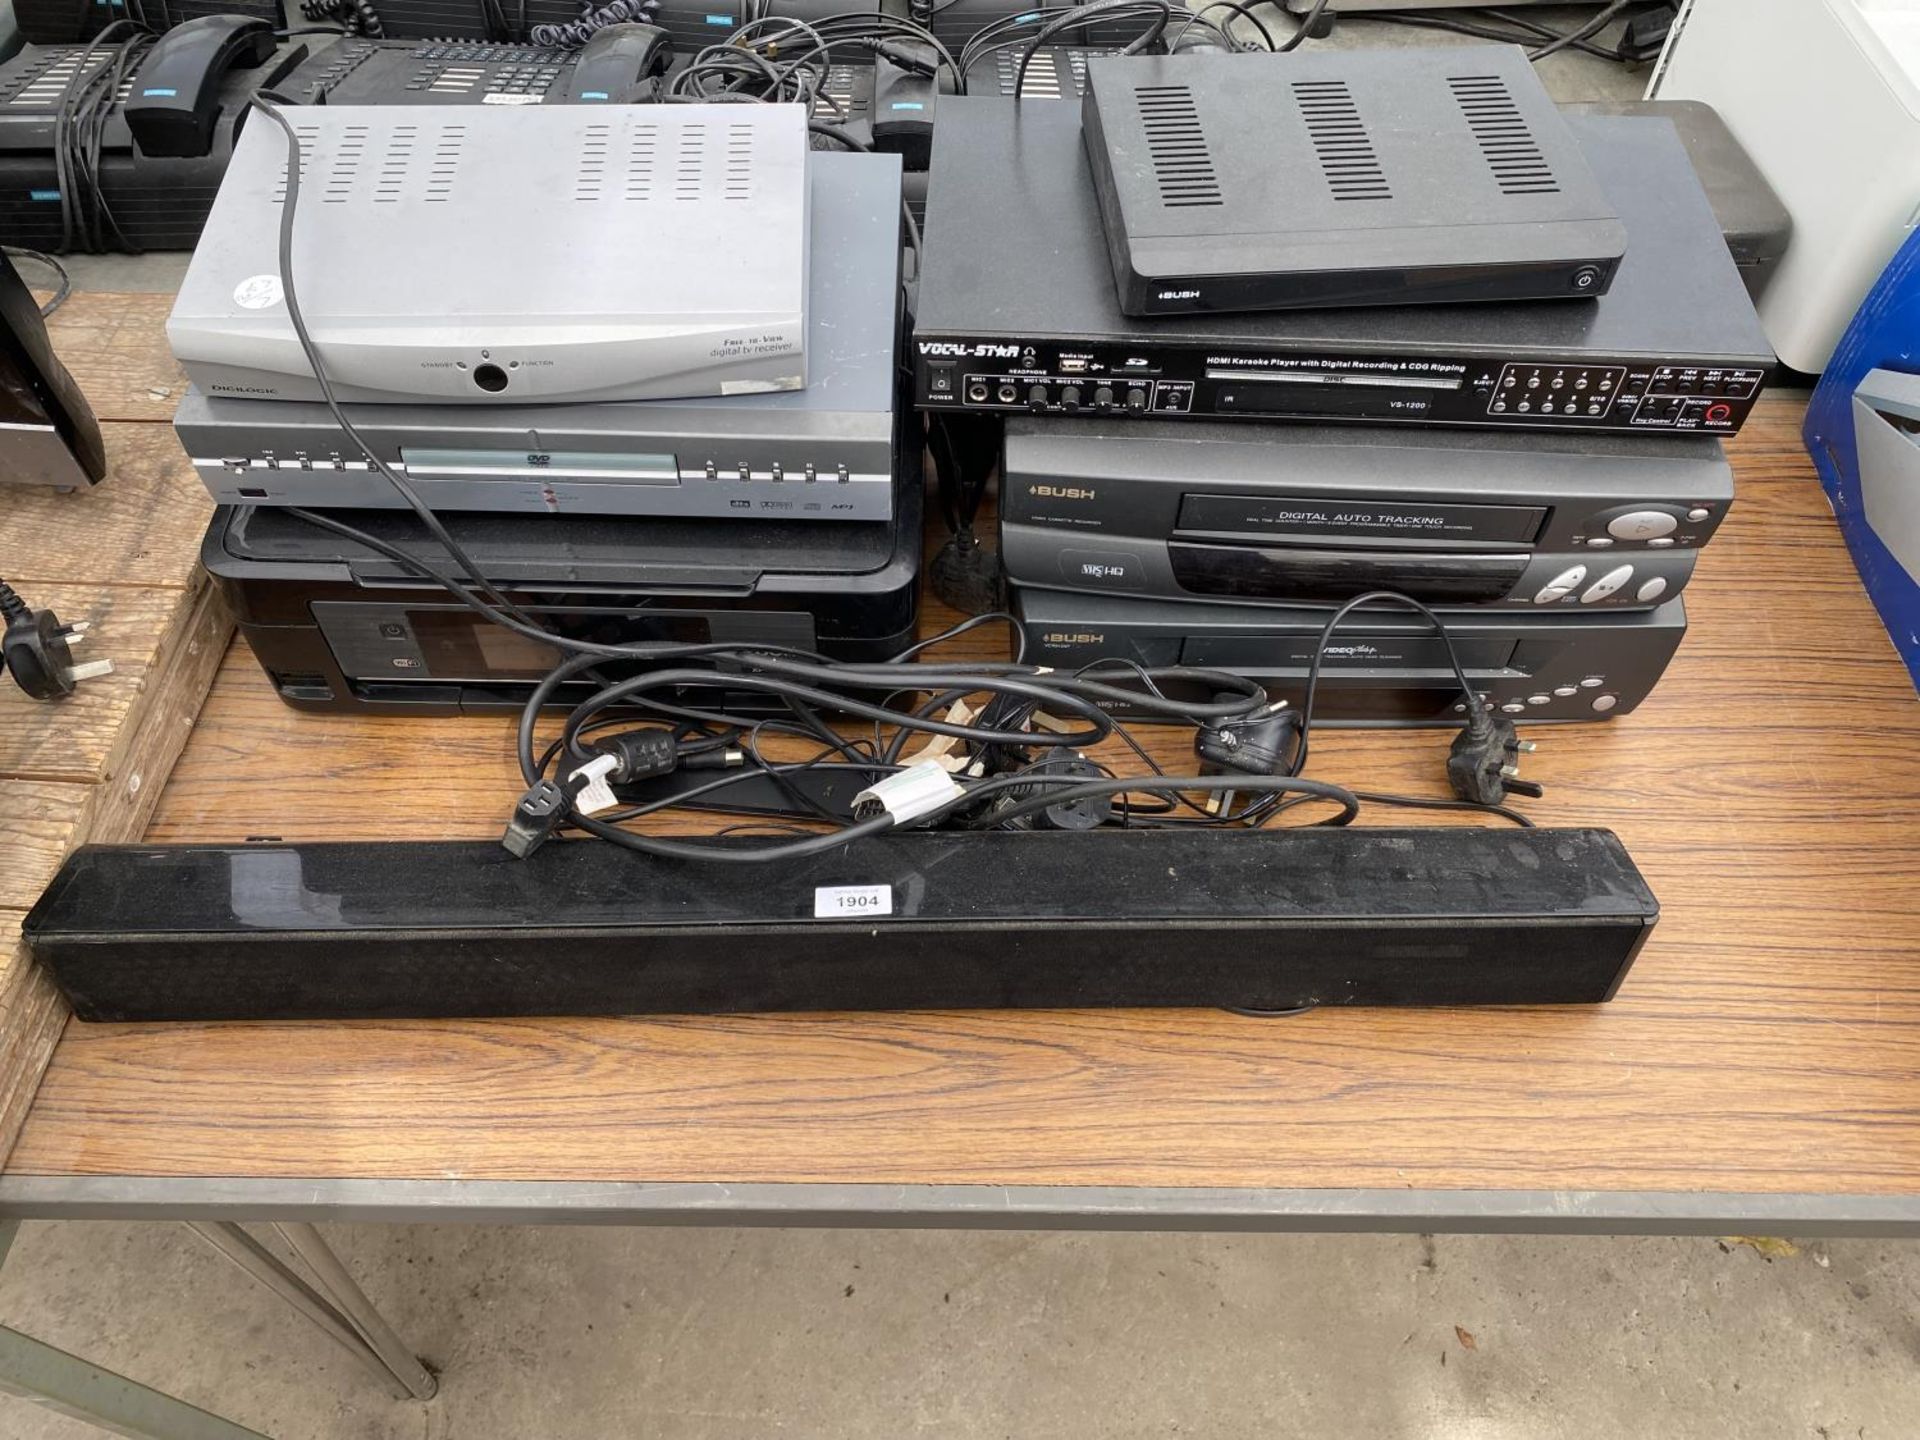 AN ASSORTMENT OF ITEMS TO INCLUDE VHS PLAYERS, A PRINTER AND A SOUND BAR ETC